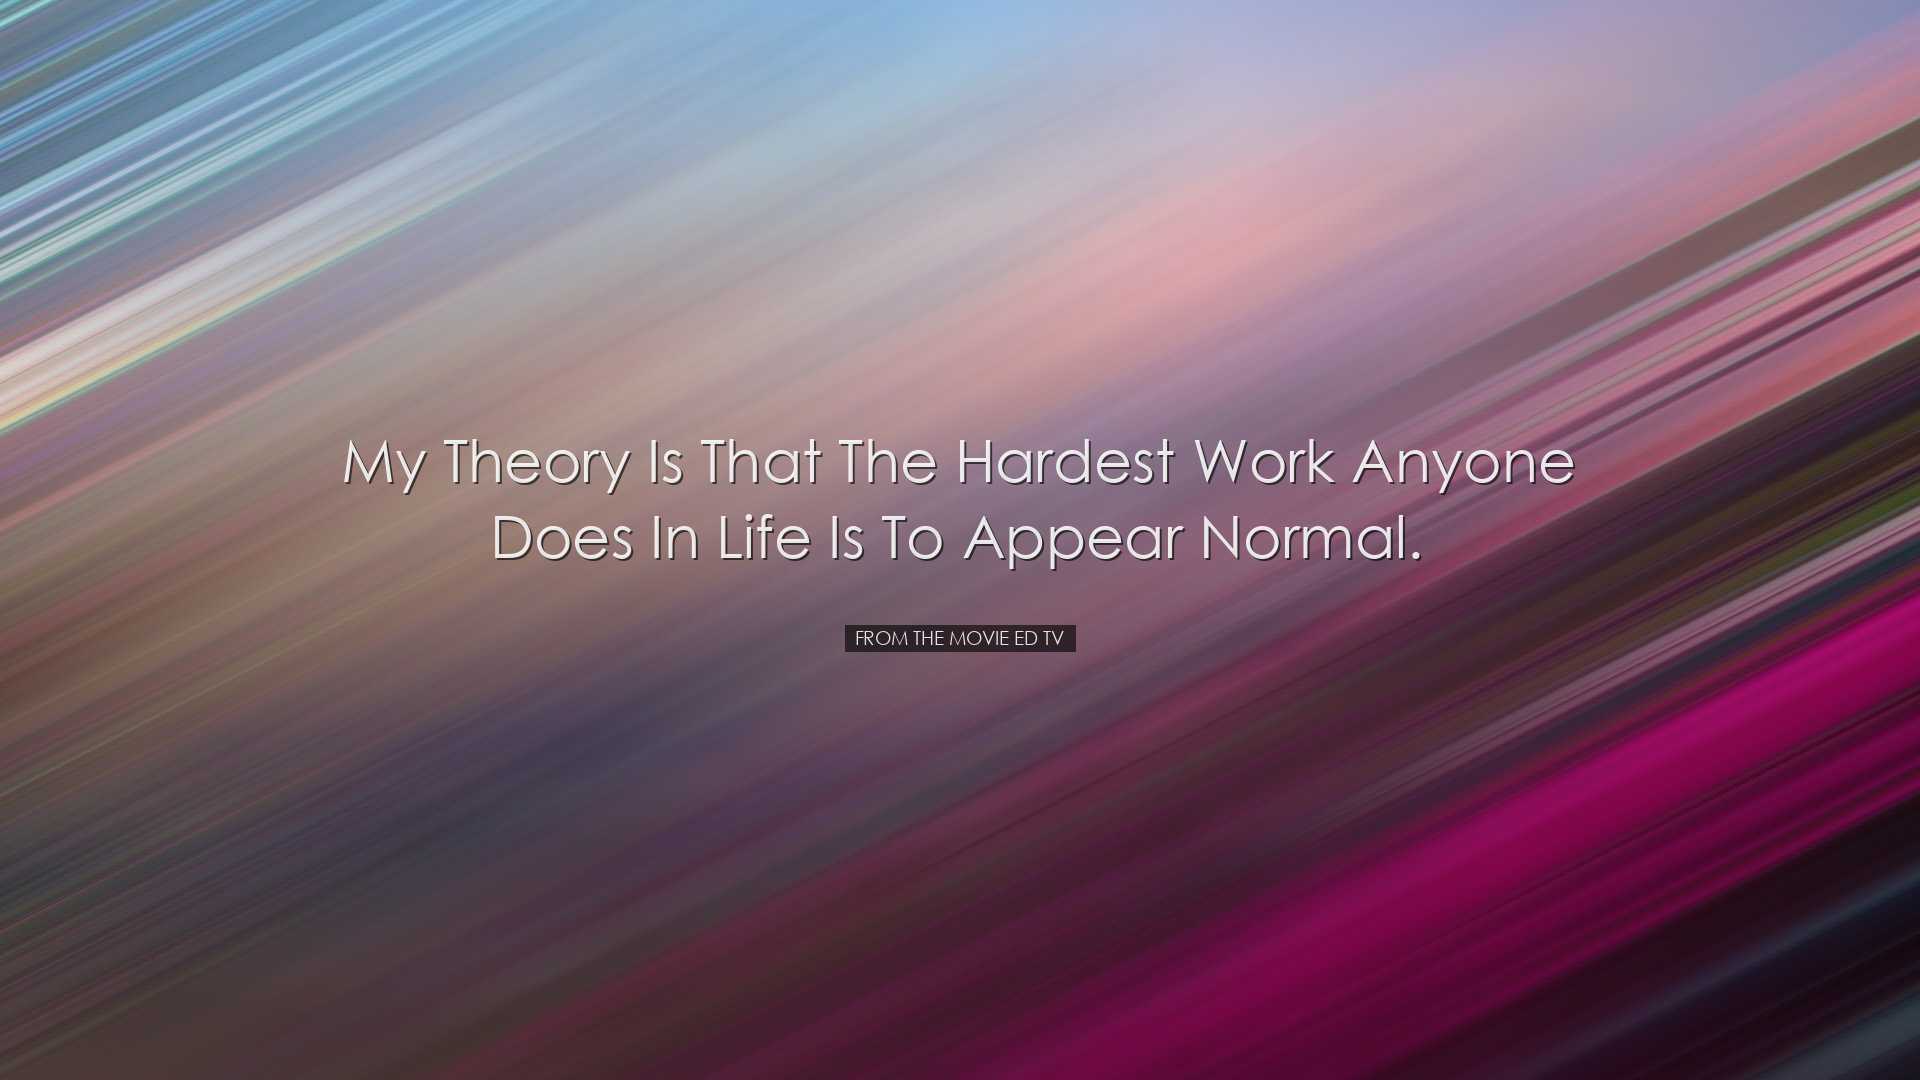 My theory is that the hardest work anyone does in life is to appea